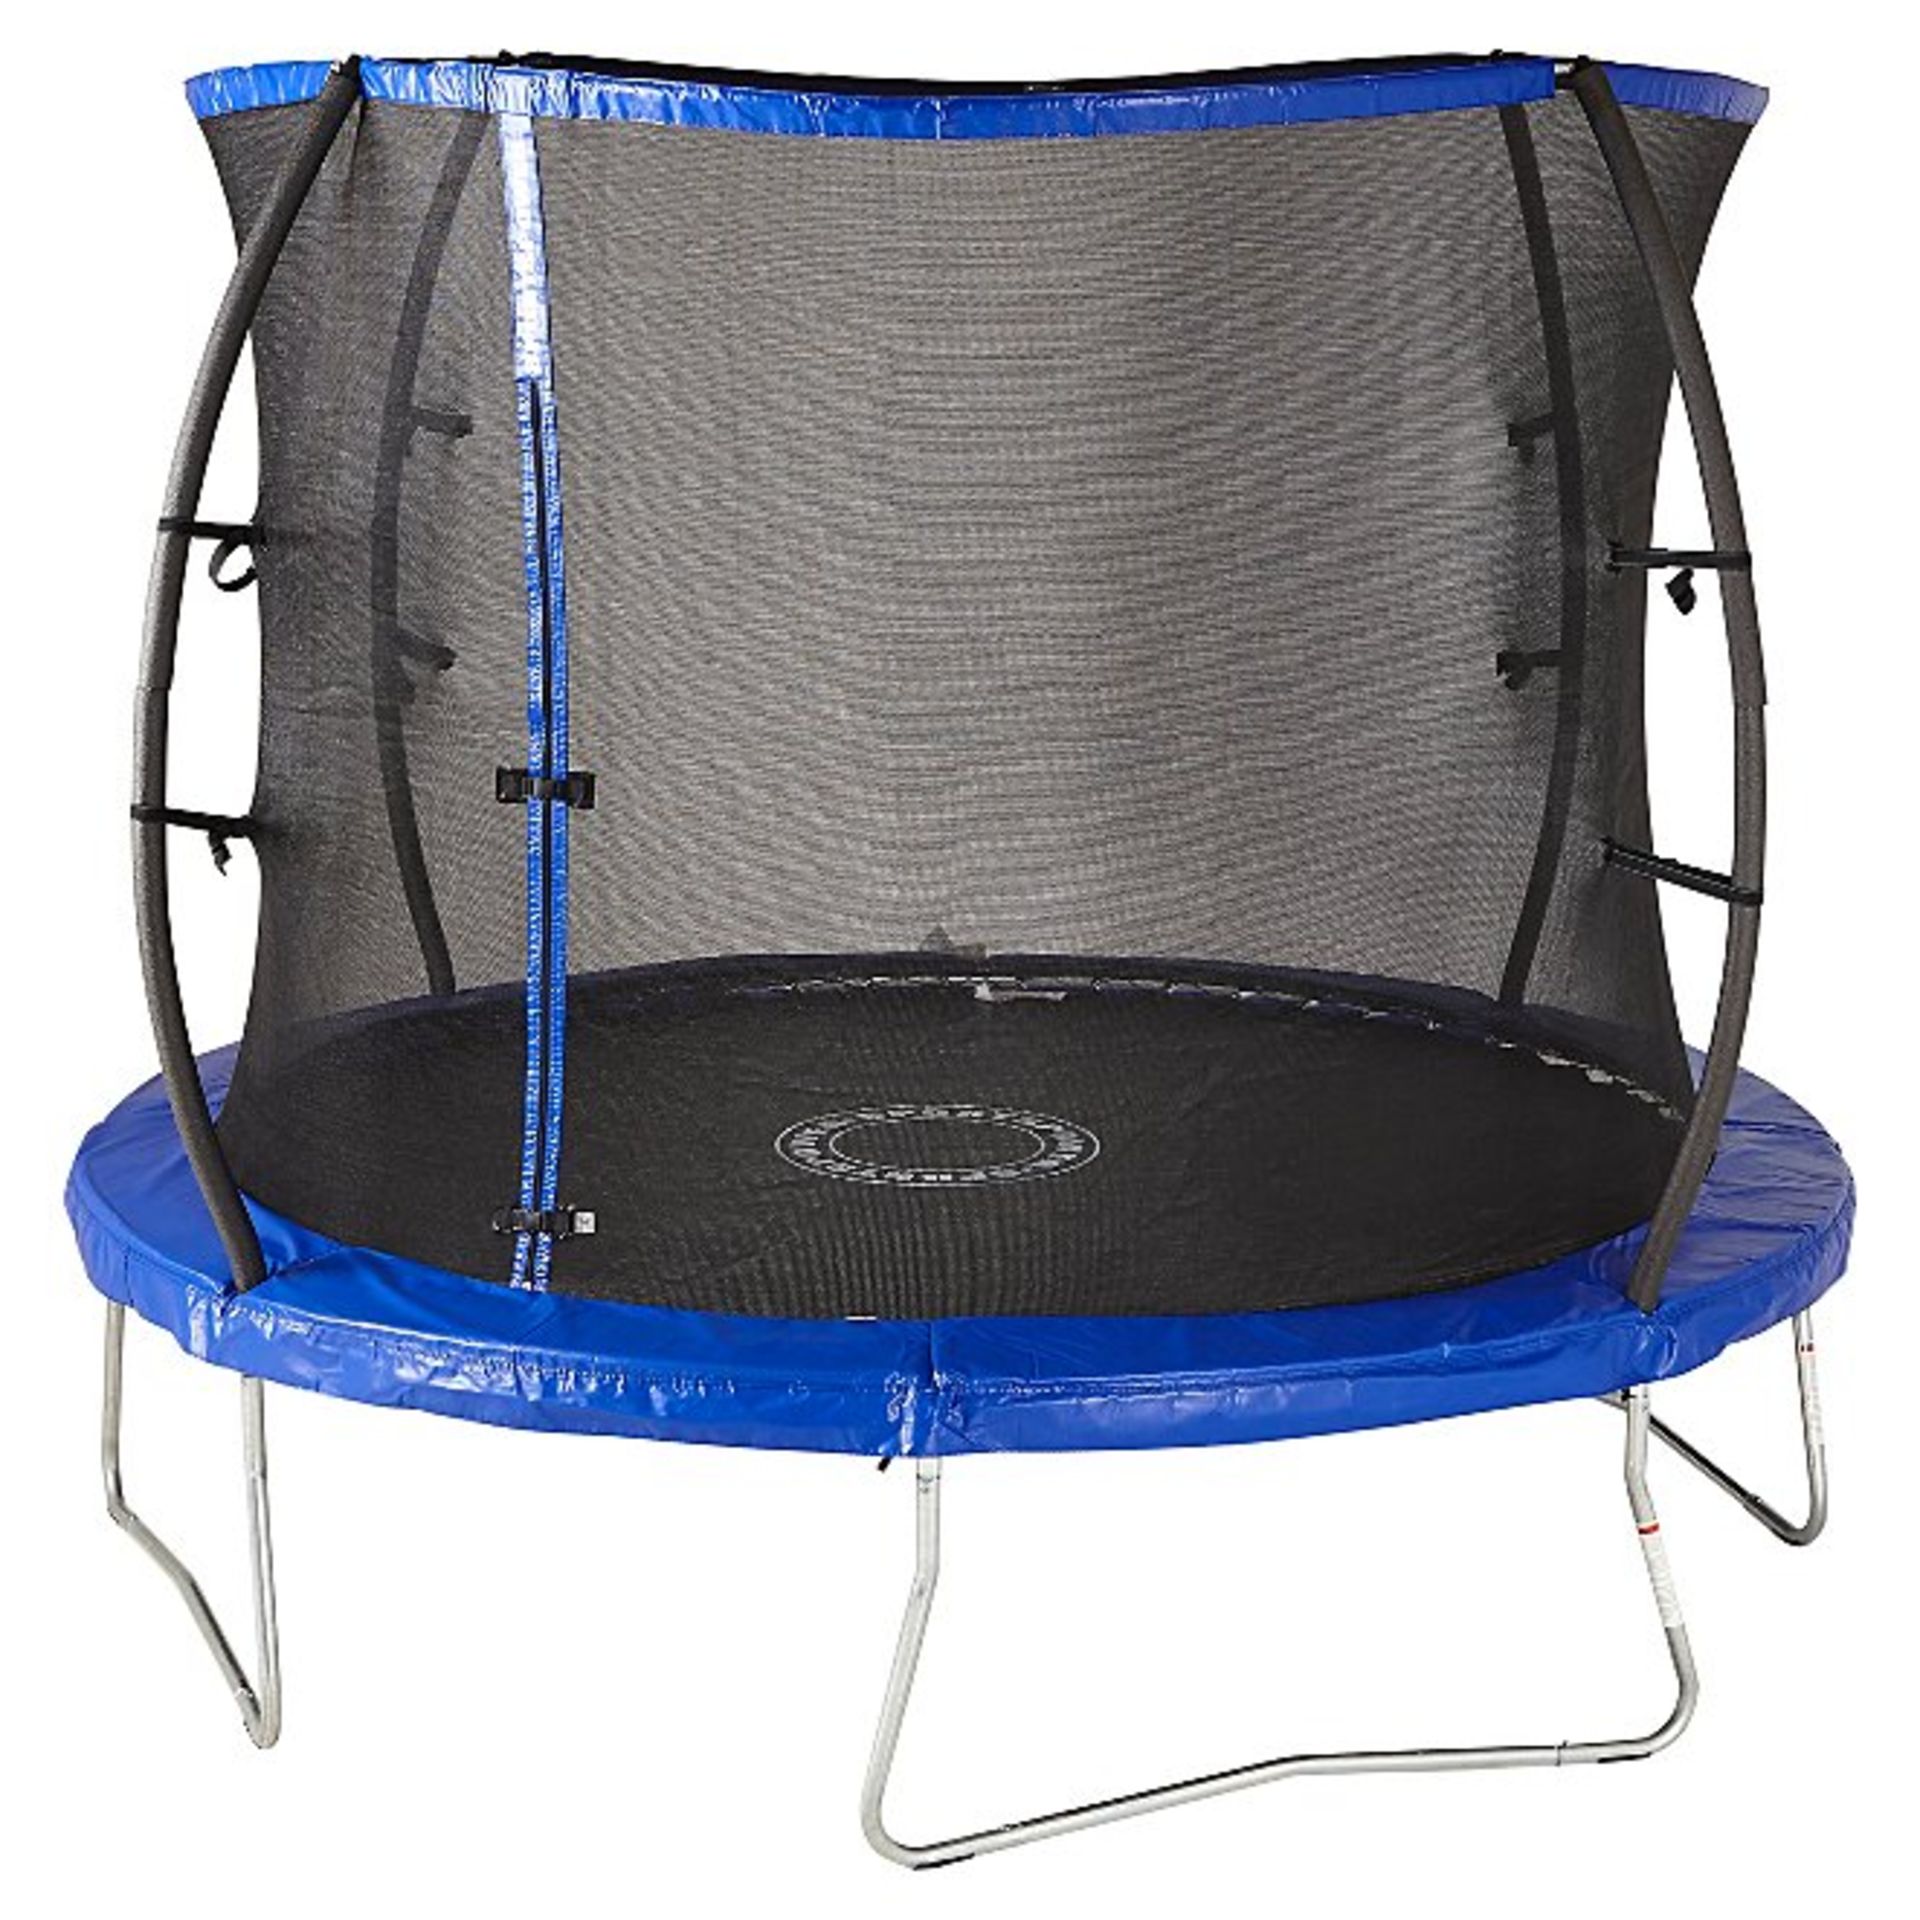 (R16) 1x SportsPower 10ft Trampoline. RRP £159. (Height 255 cm). (Raw Customer Return- Unchecked) - Image 2 of 3